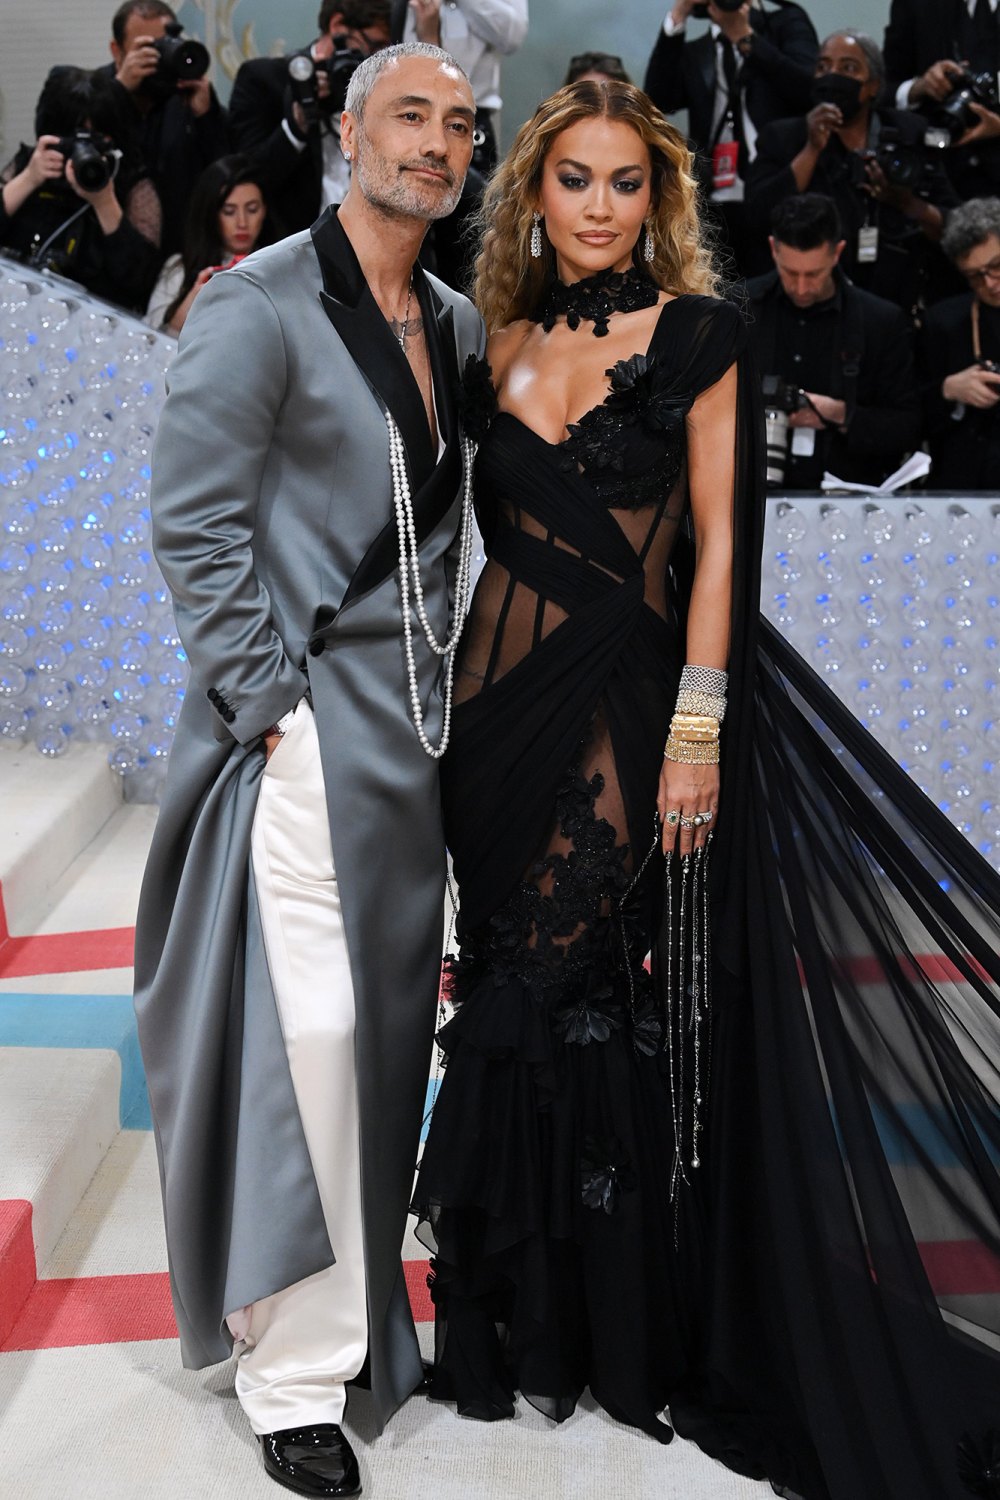 Met Gala 2023: Hottest Couples on the Red Carpet